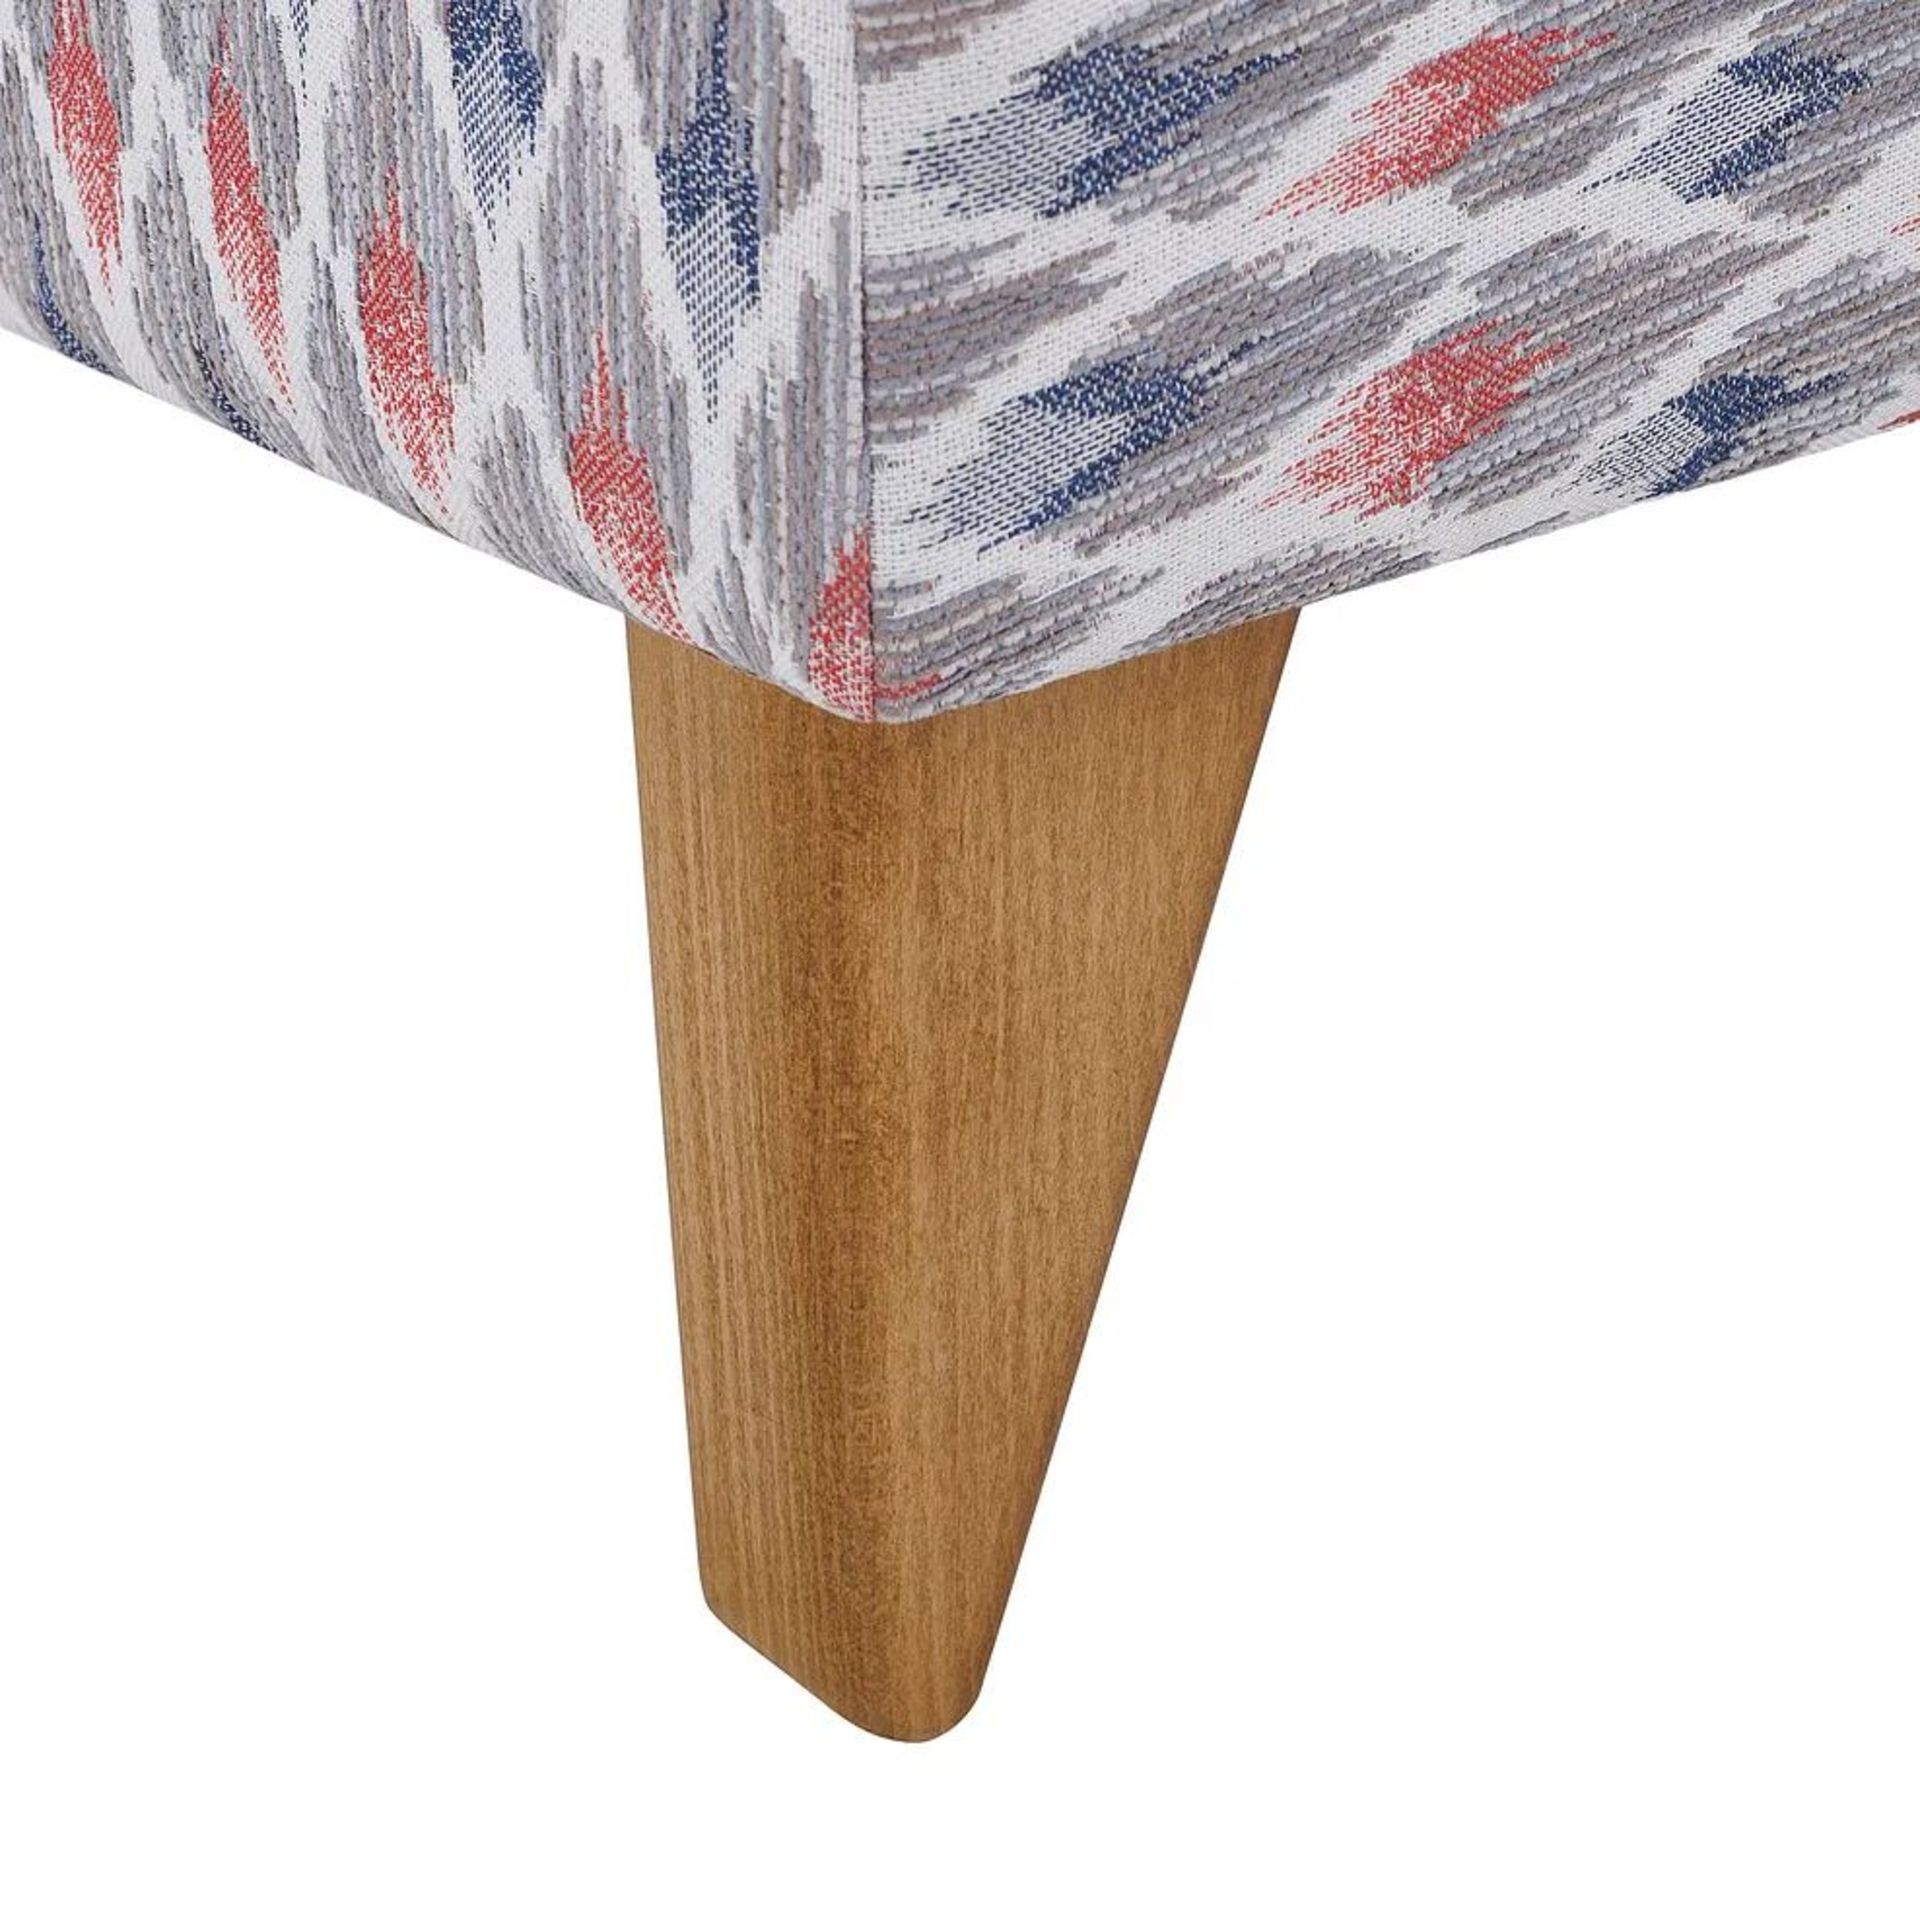 BRAND NEW JASMINE Footstool - NEWTON CORAL FABRIC. RRP £349. Built with a sturdy hardwood frame - Image 4 of 5